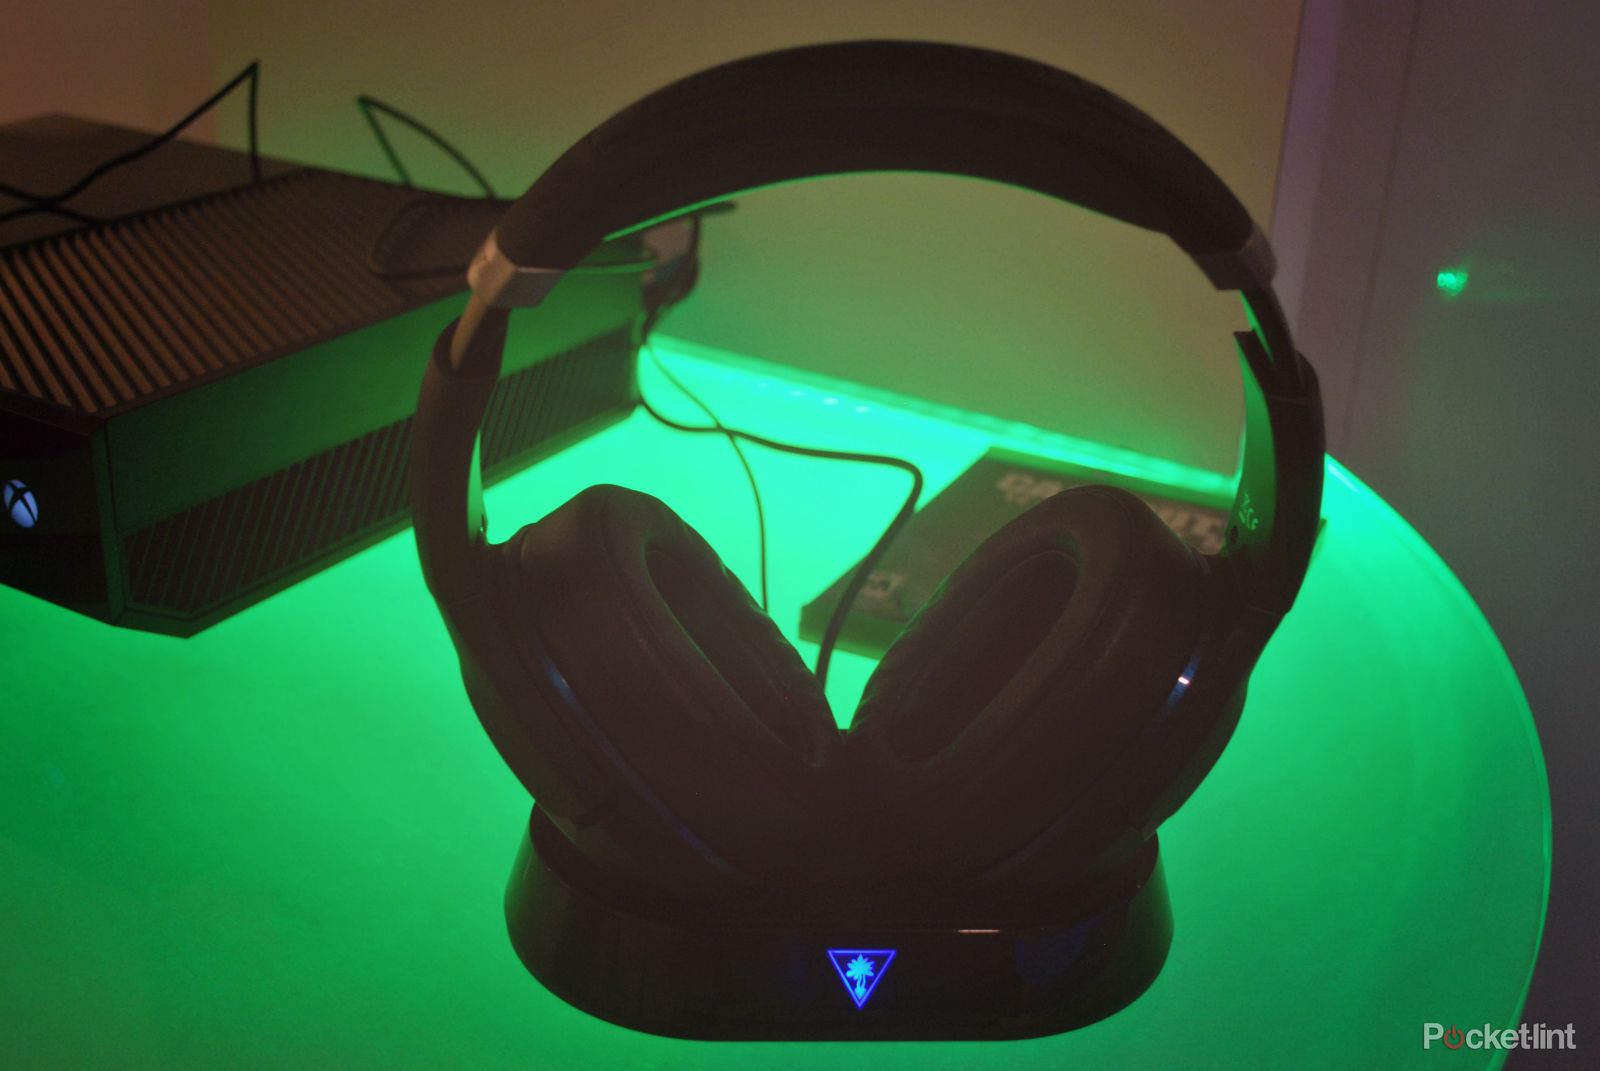 turtle beach ear force stealth 500x xbox one headset elite 800 ps4 headset and more pictures and hands on image 1